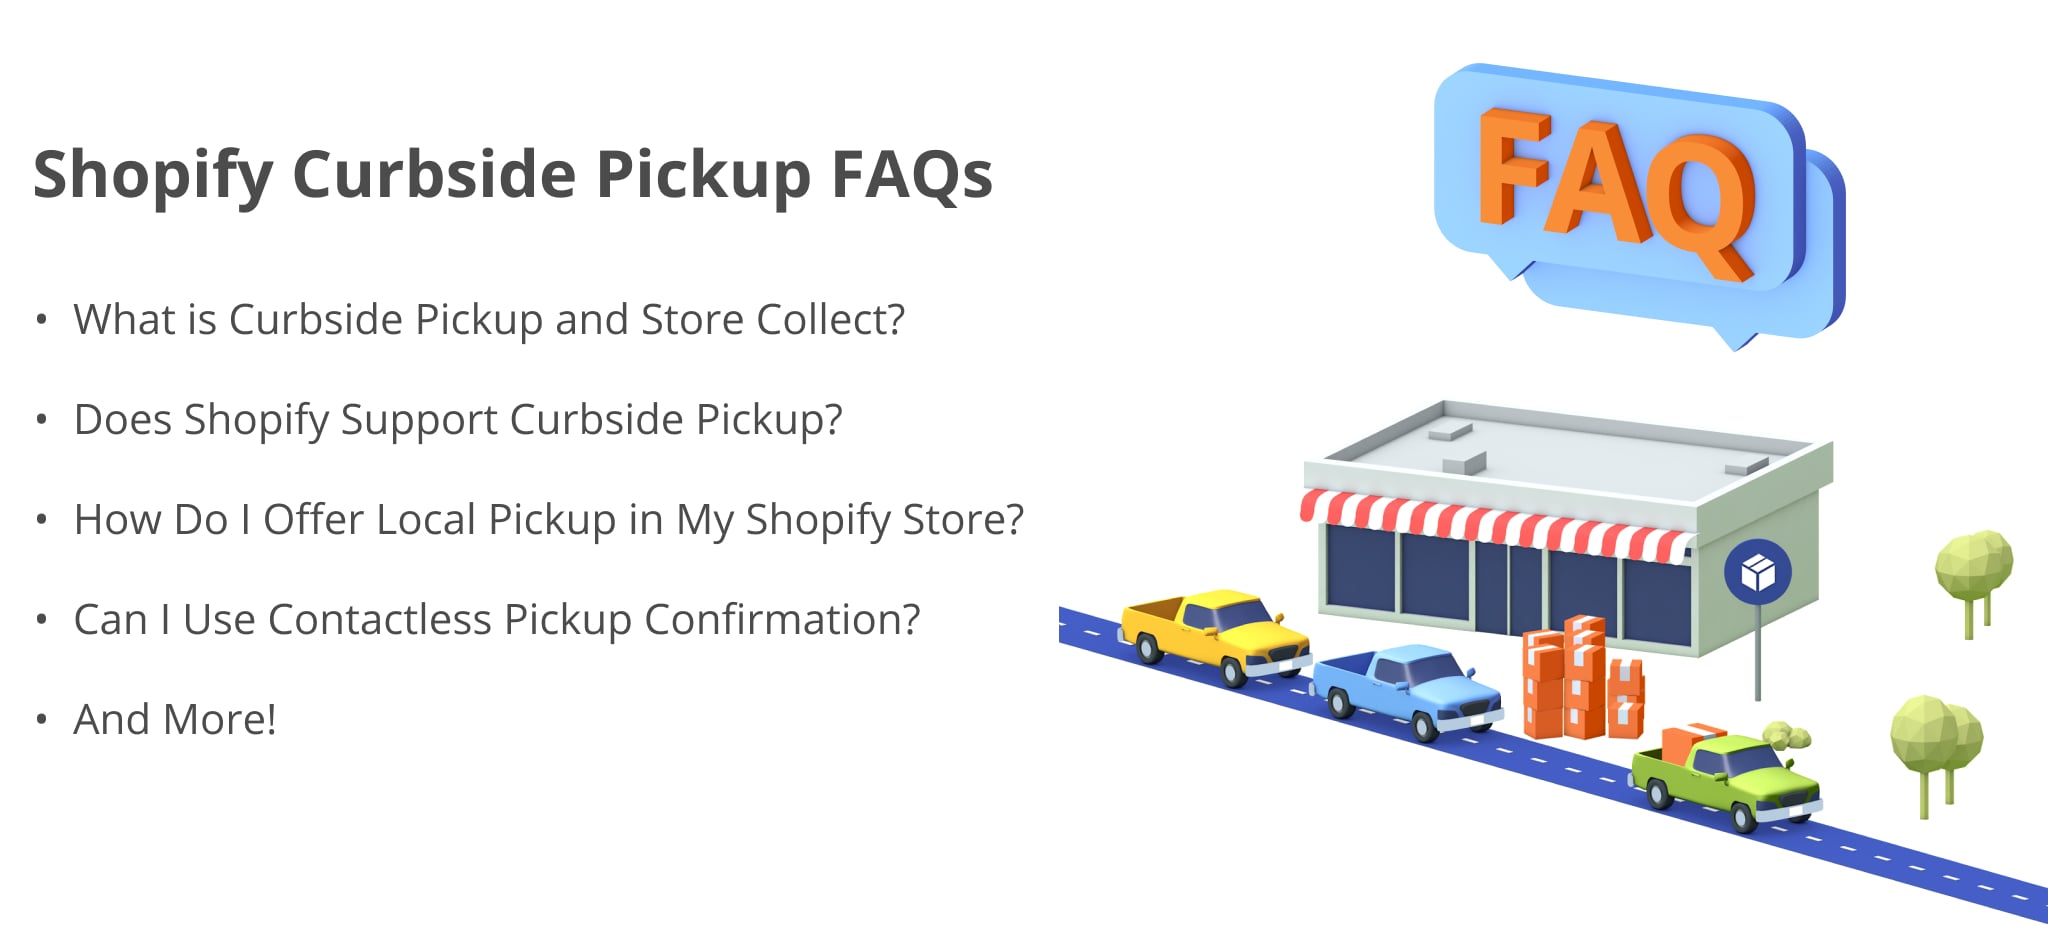 Frequently asked questions about Route4Me's Shopify Curbside Pickup and Store Collect app for eCommerce stores and online orders.